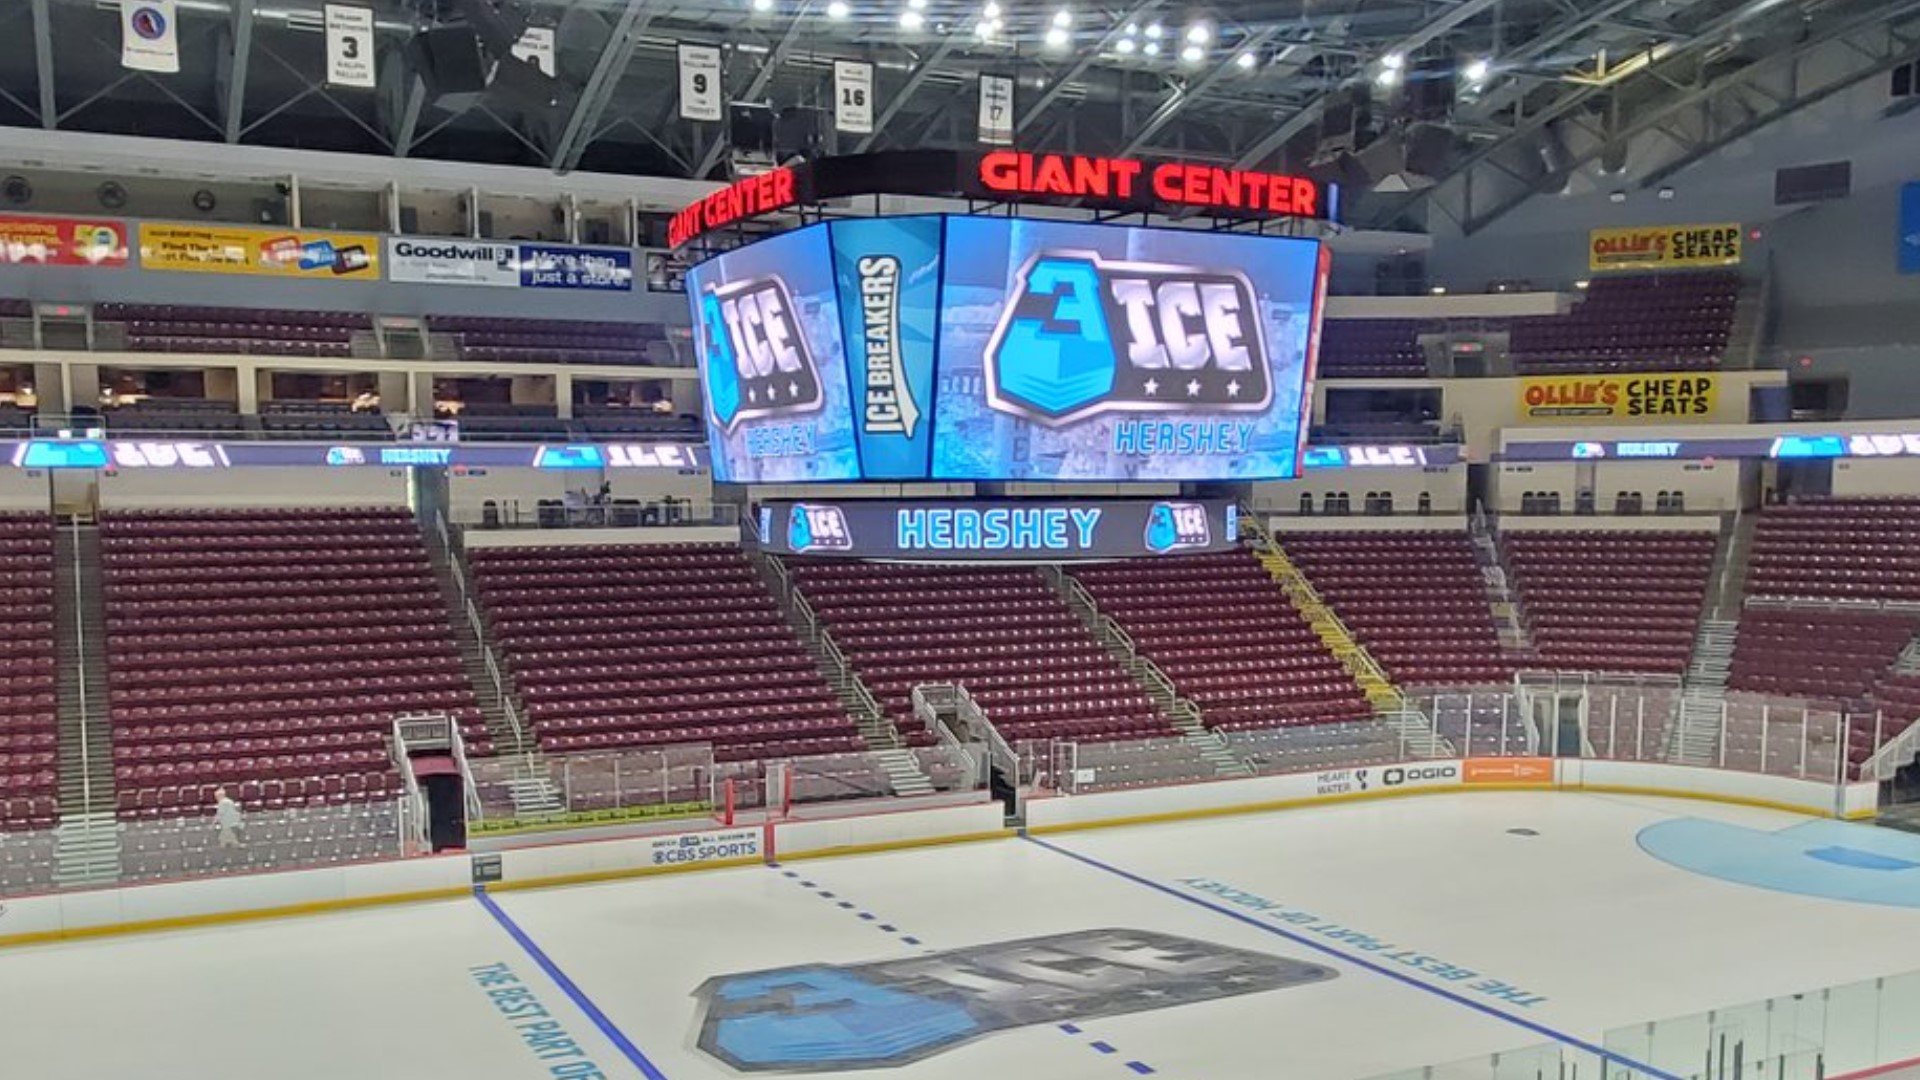 Hershey Bears - Looking for Bears gear? While the Giant